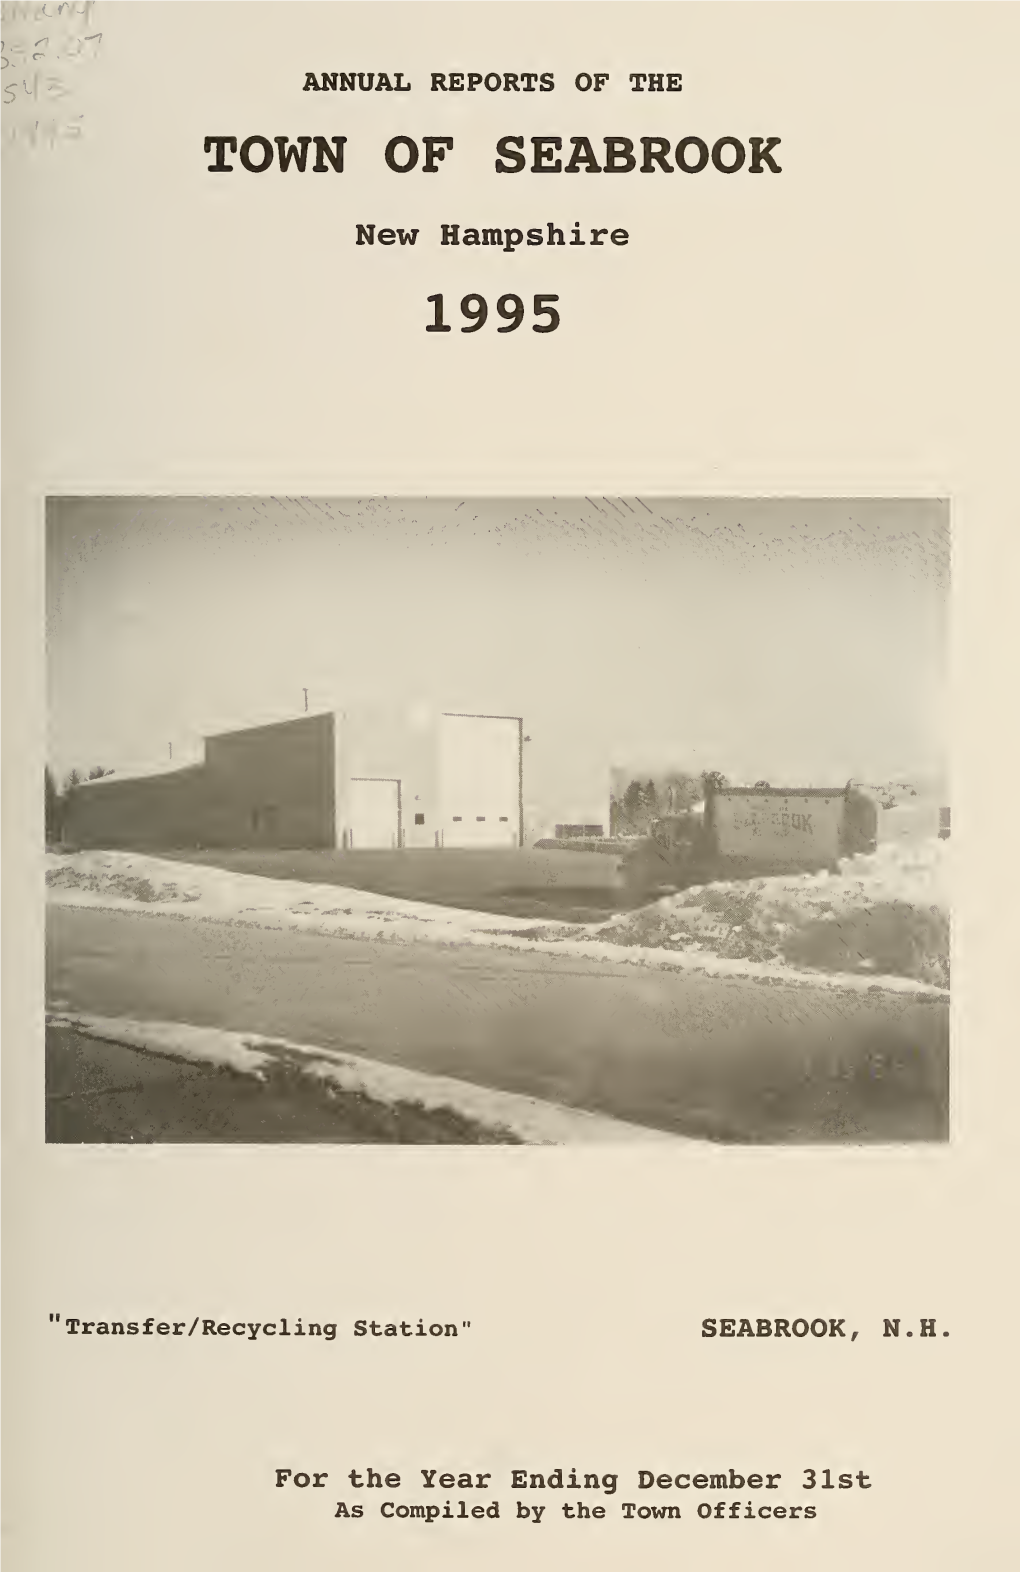 Annual Reports of the Town of Seabrook, New Hampshire for the Year